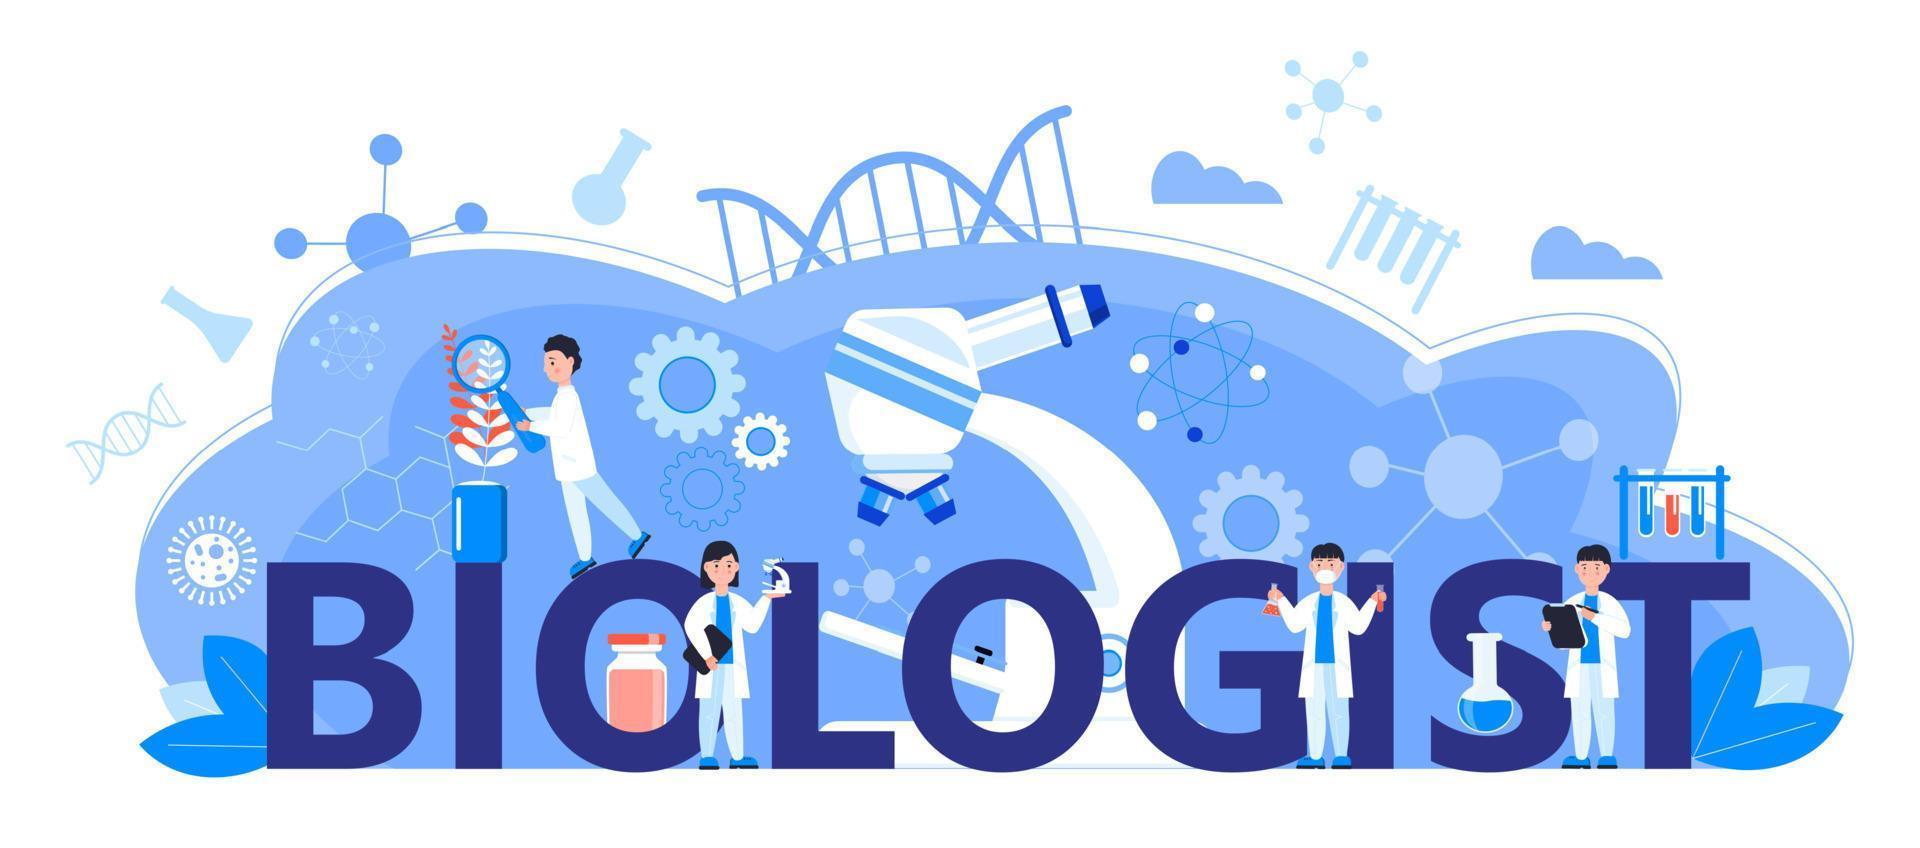 Biologist online learning concept. Biological technology, biotechnology science vector. Scientists study microorganisms in microscope. Medical research illustration for homepage, banner. vector